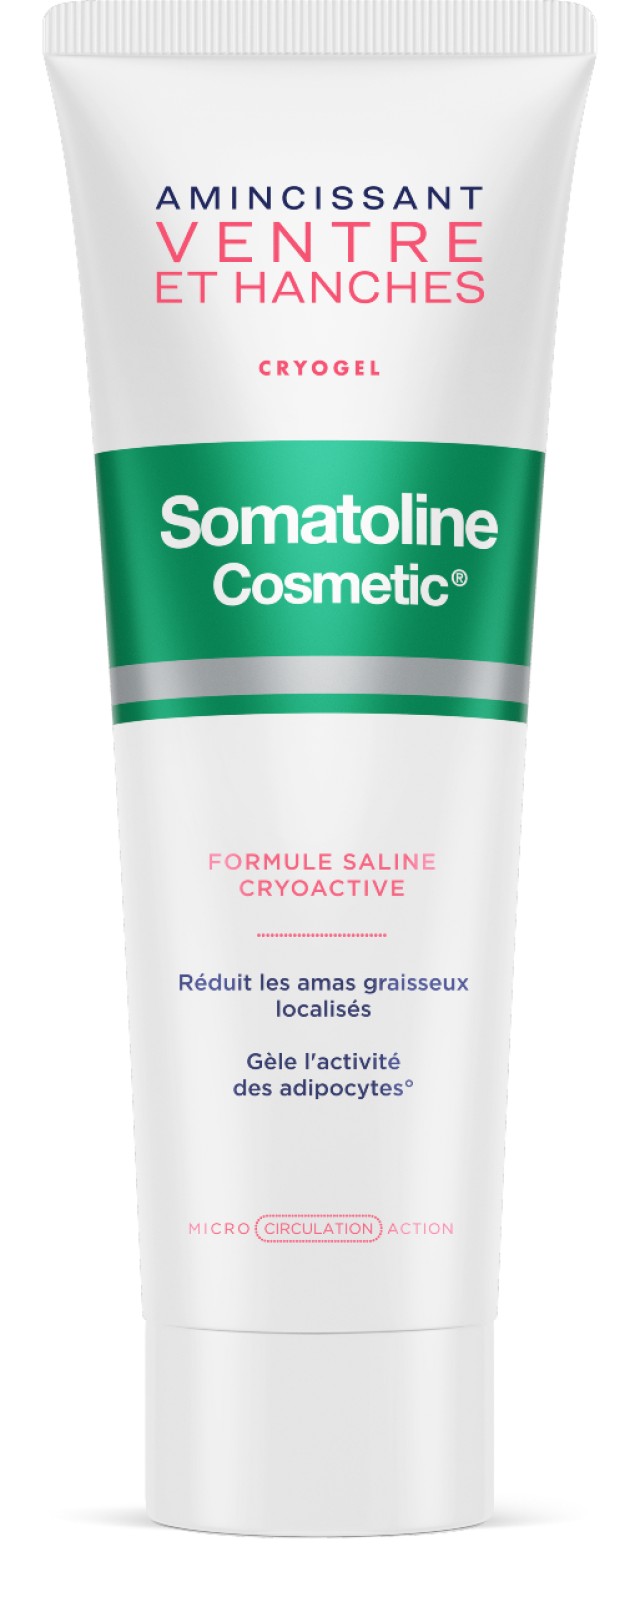 Somatoline Cosmetic Slimming Tummy and Hips Αδυνάτισμα Κοιλιά και Γοφοί Cryogel, 250ml